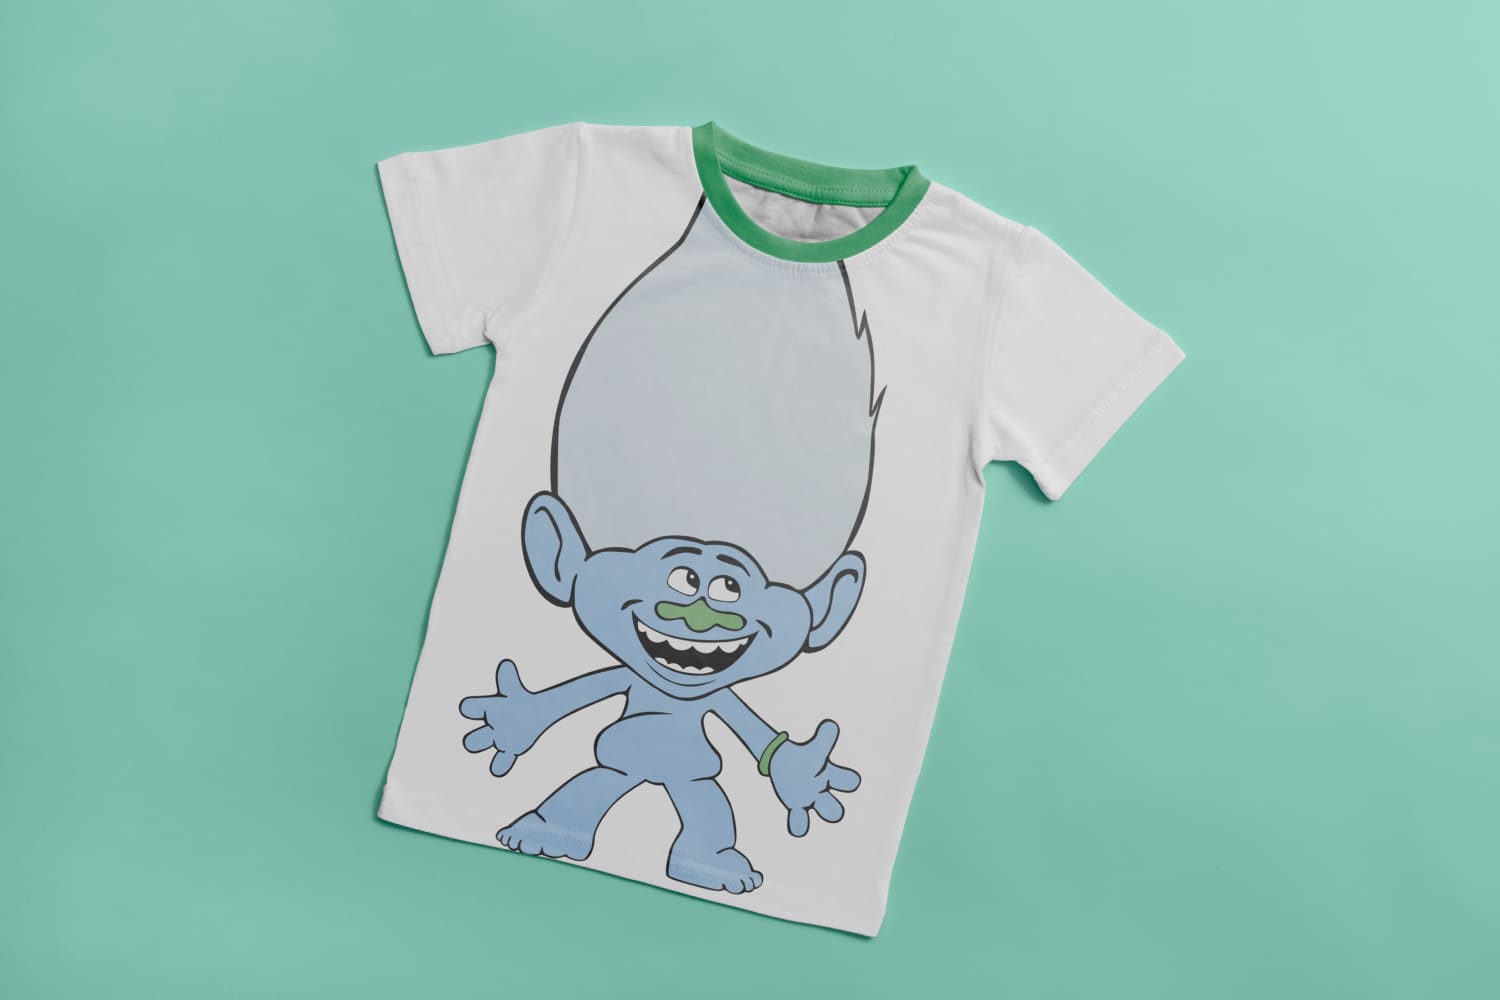 White T-shirt with green collar and image of cartoon character - Guy Diamond.